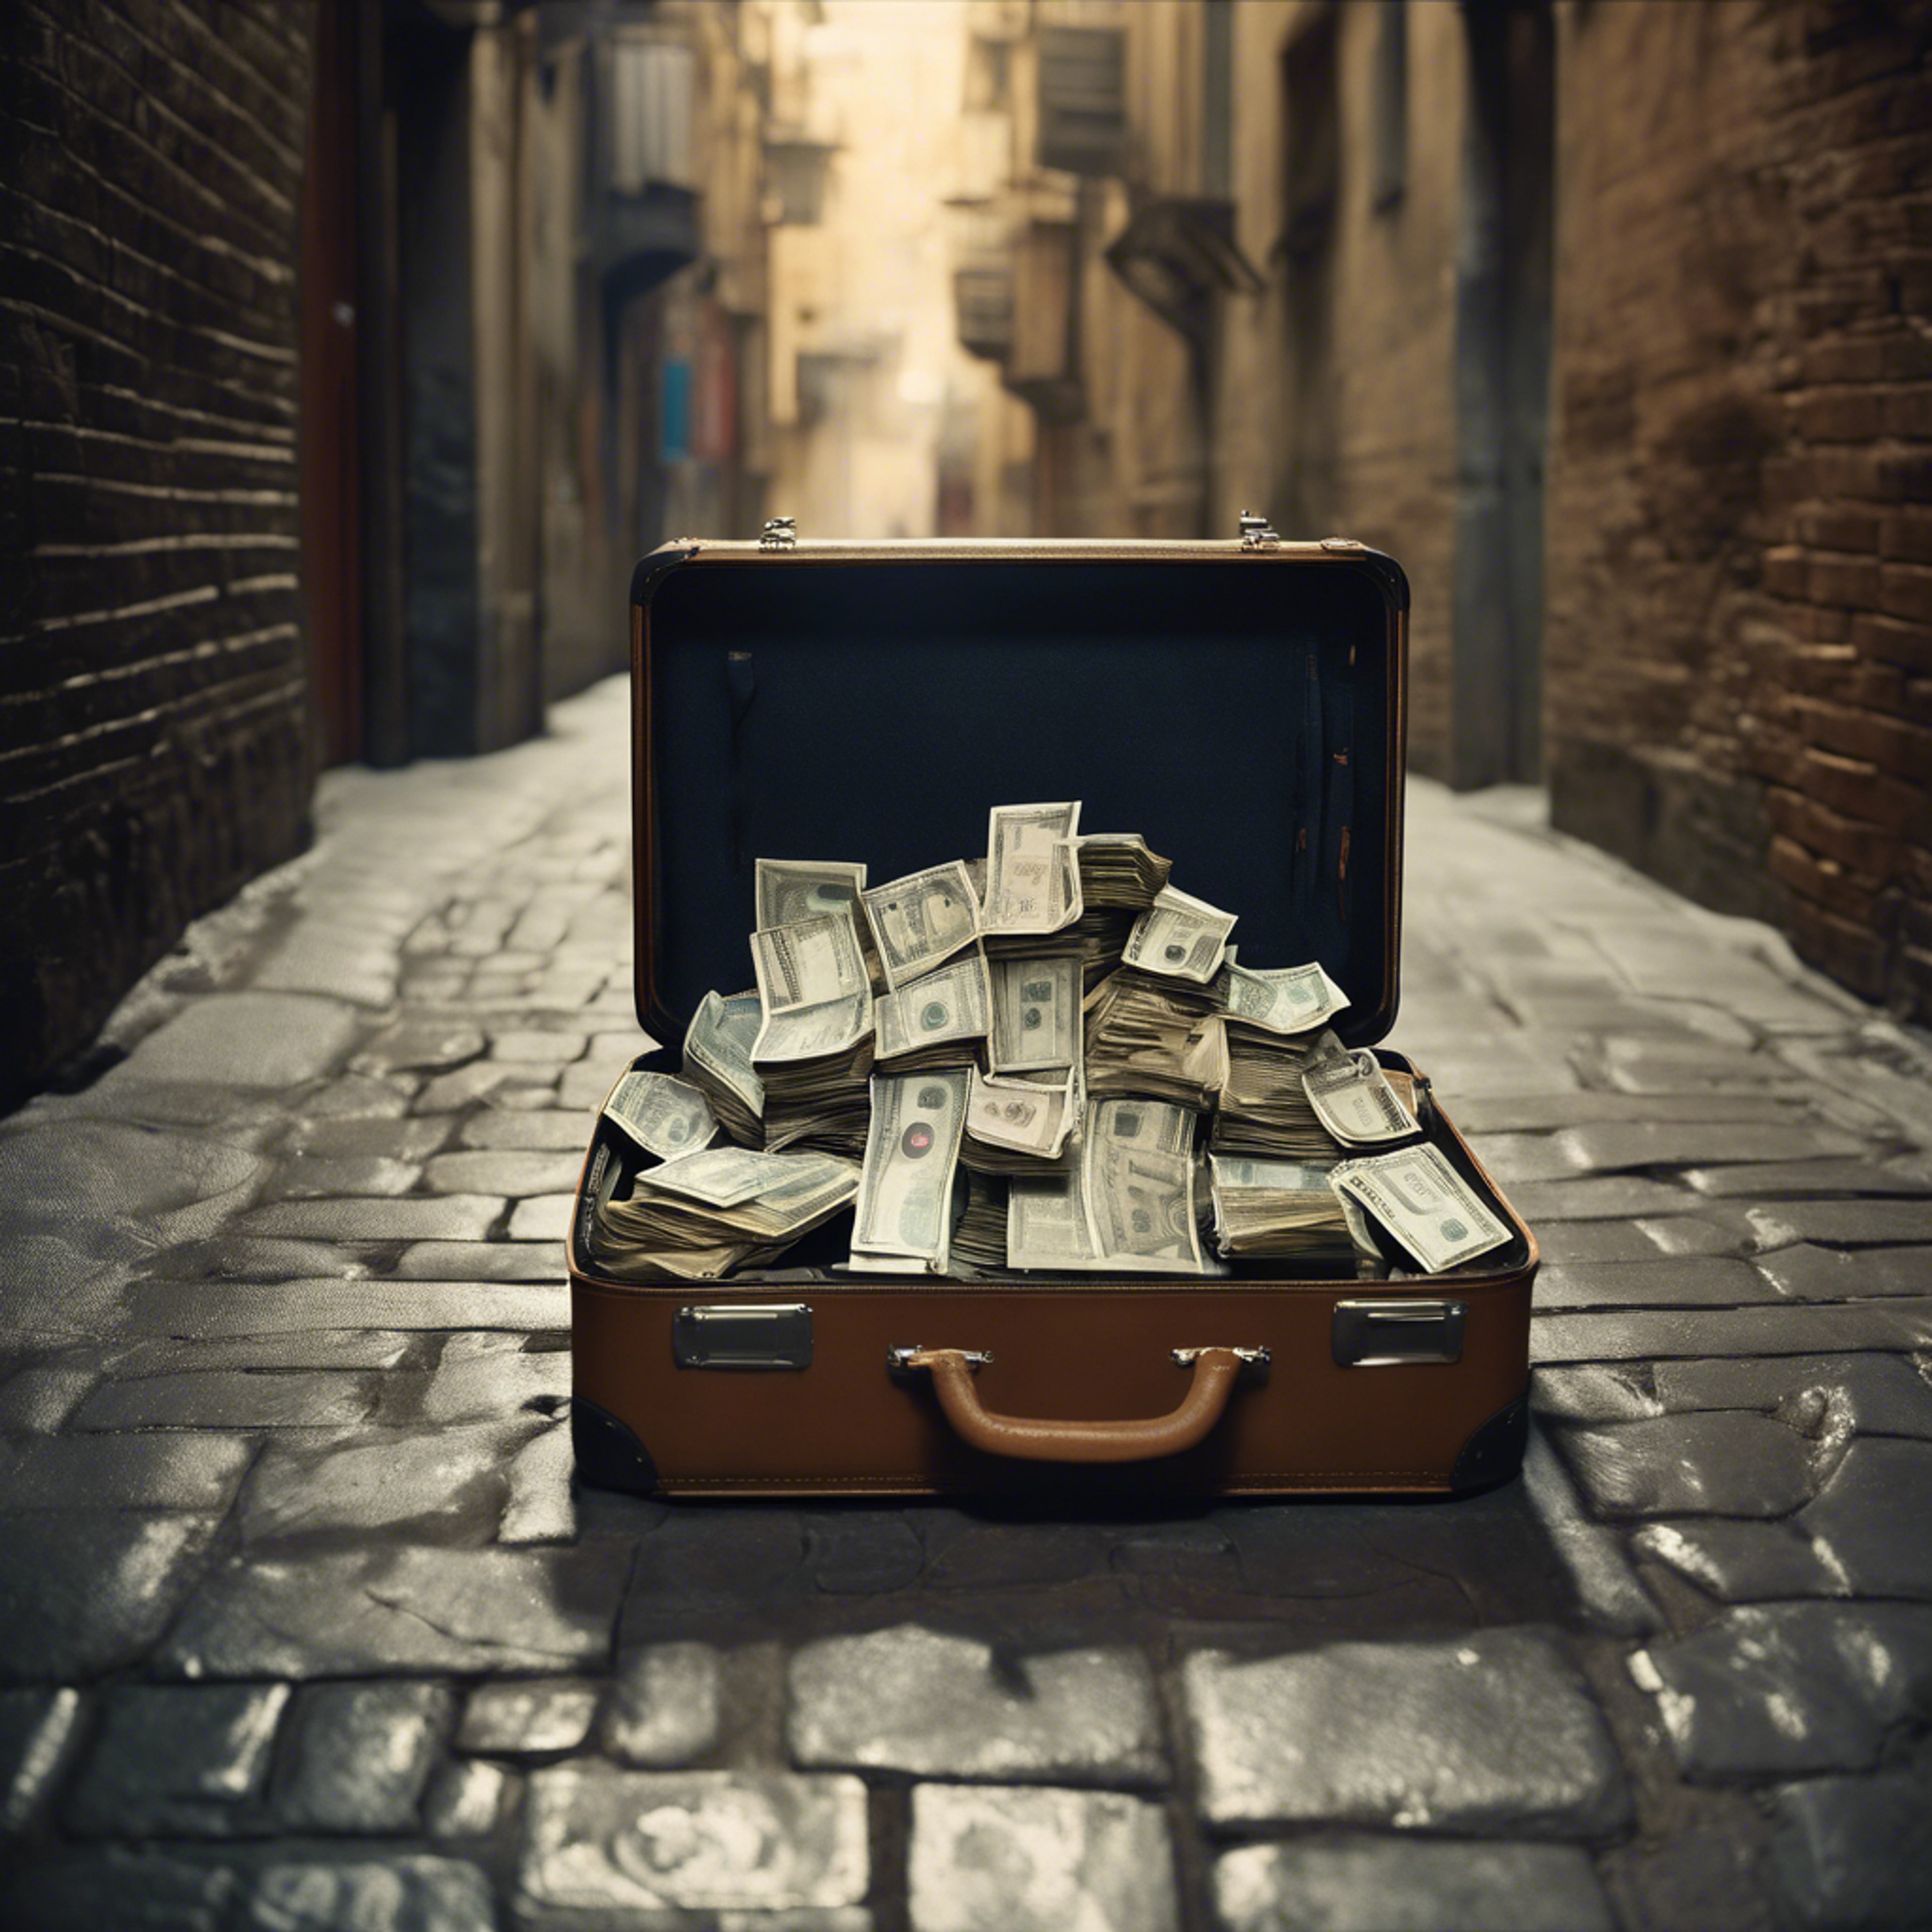 A suitcase filled with mafia money being exchanged in dimly lit alleyway. ورق الجدران[001aead7b2c840f5bbce]